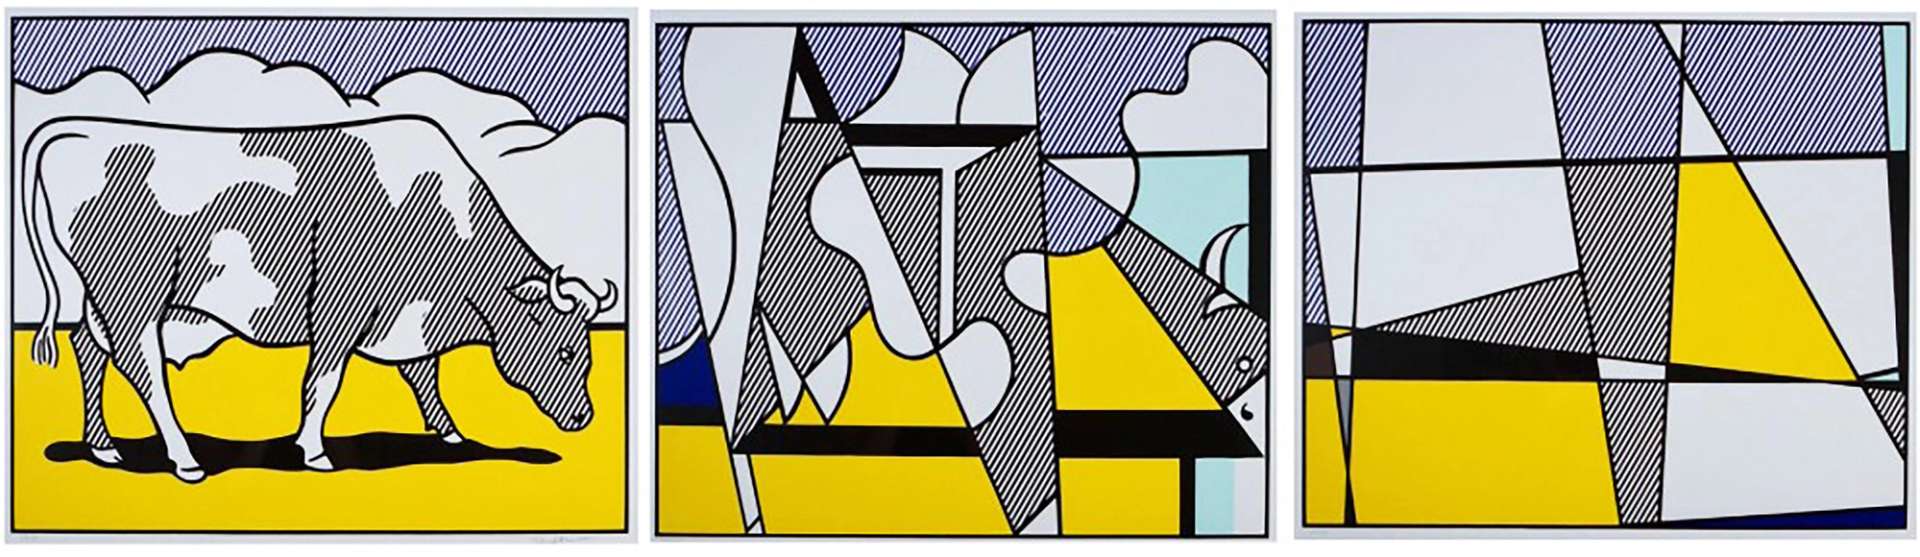 Lichtenstein simplified the image of Holstein Friesian cattle in two related series of prints. Each print in both series expanded upon the composition of the one that came before. The gradual process of abstraction was notable only when the sequences were regarded in their entirety.